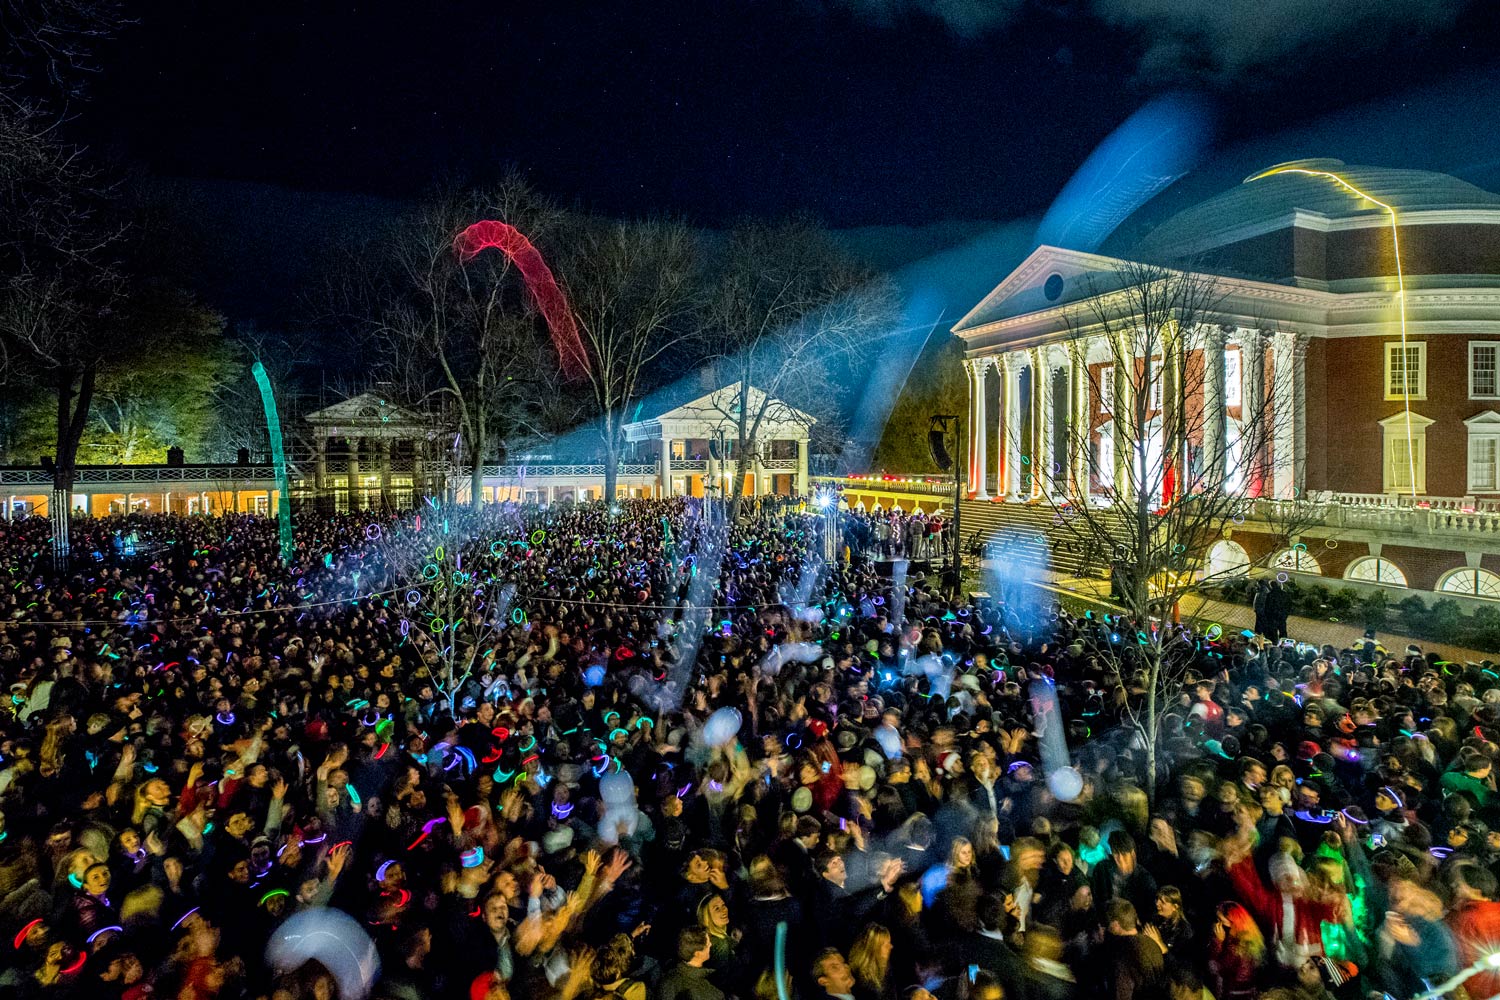 The lawn filled with people and lights at the lighting on the Lawn